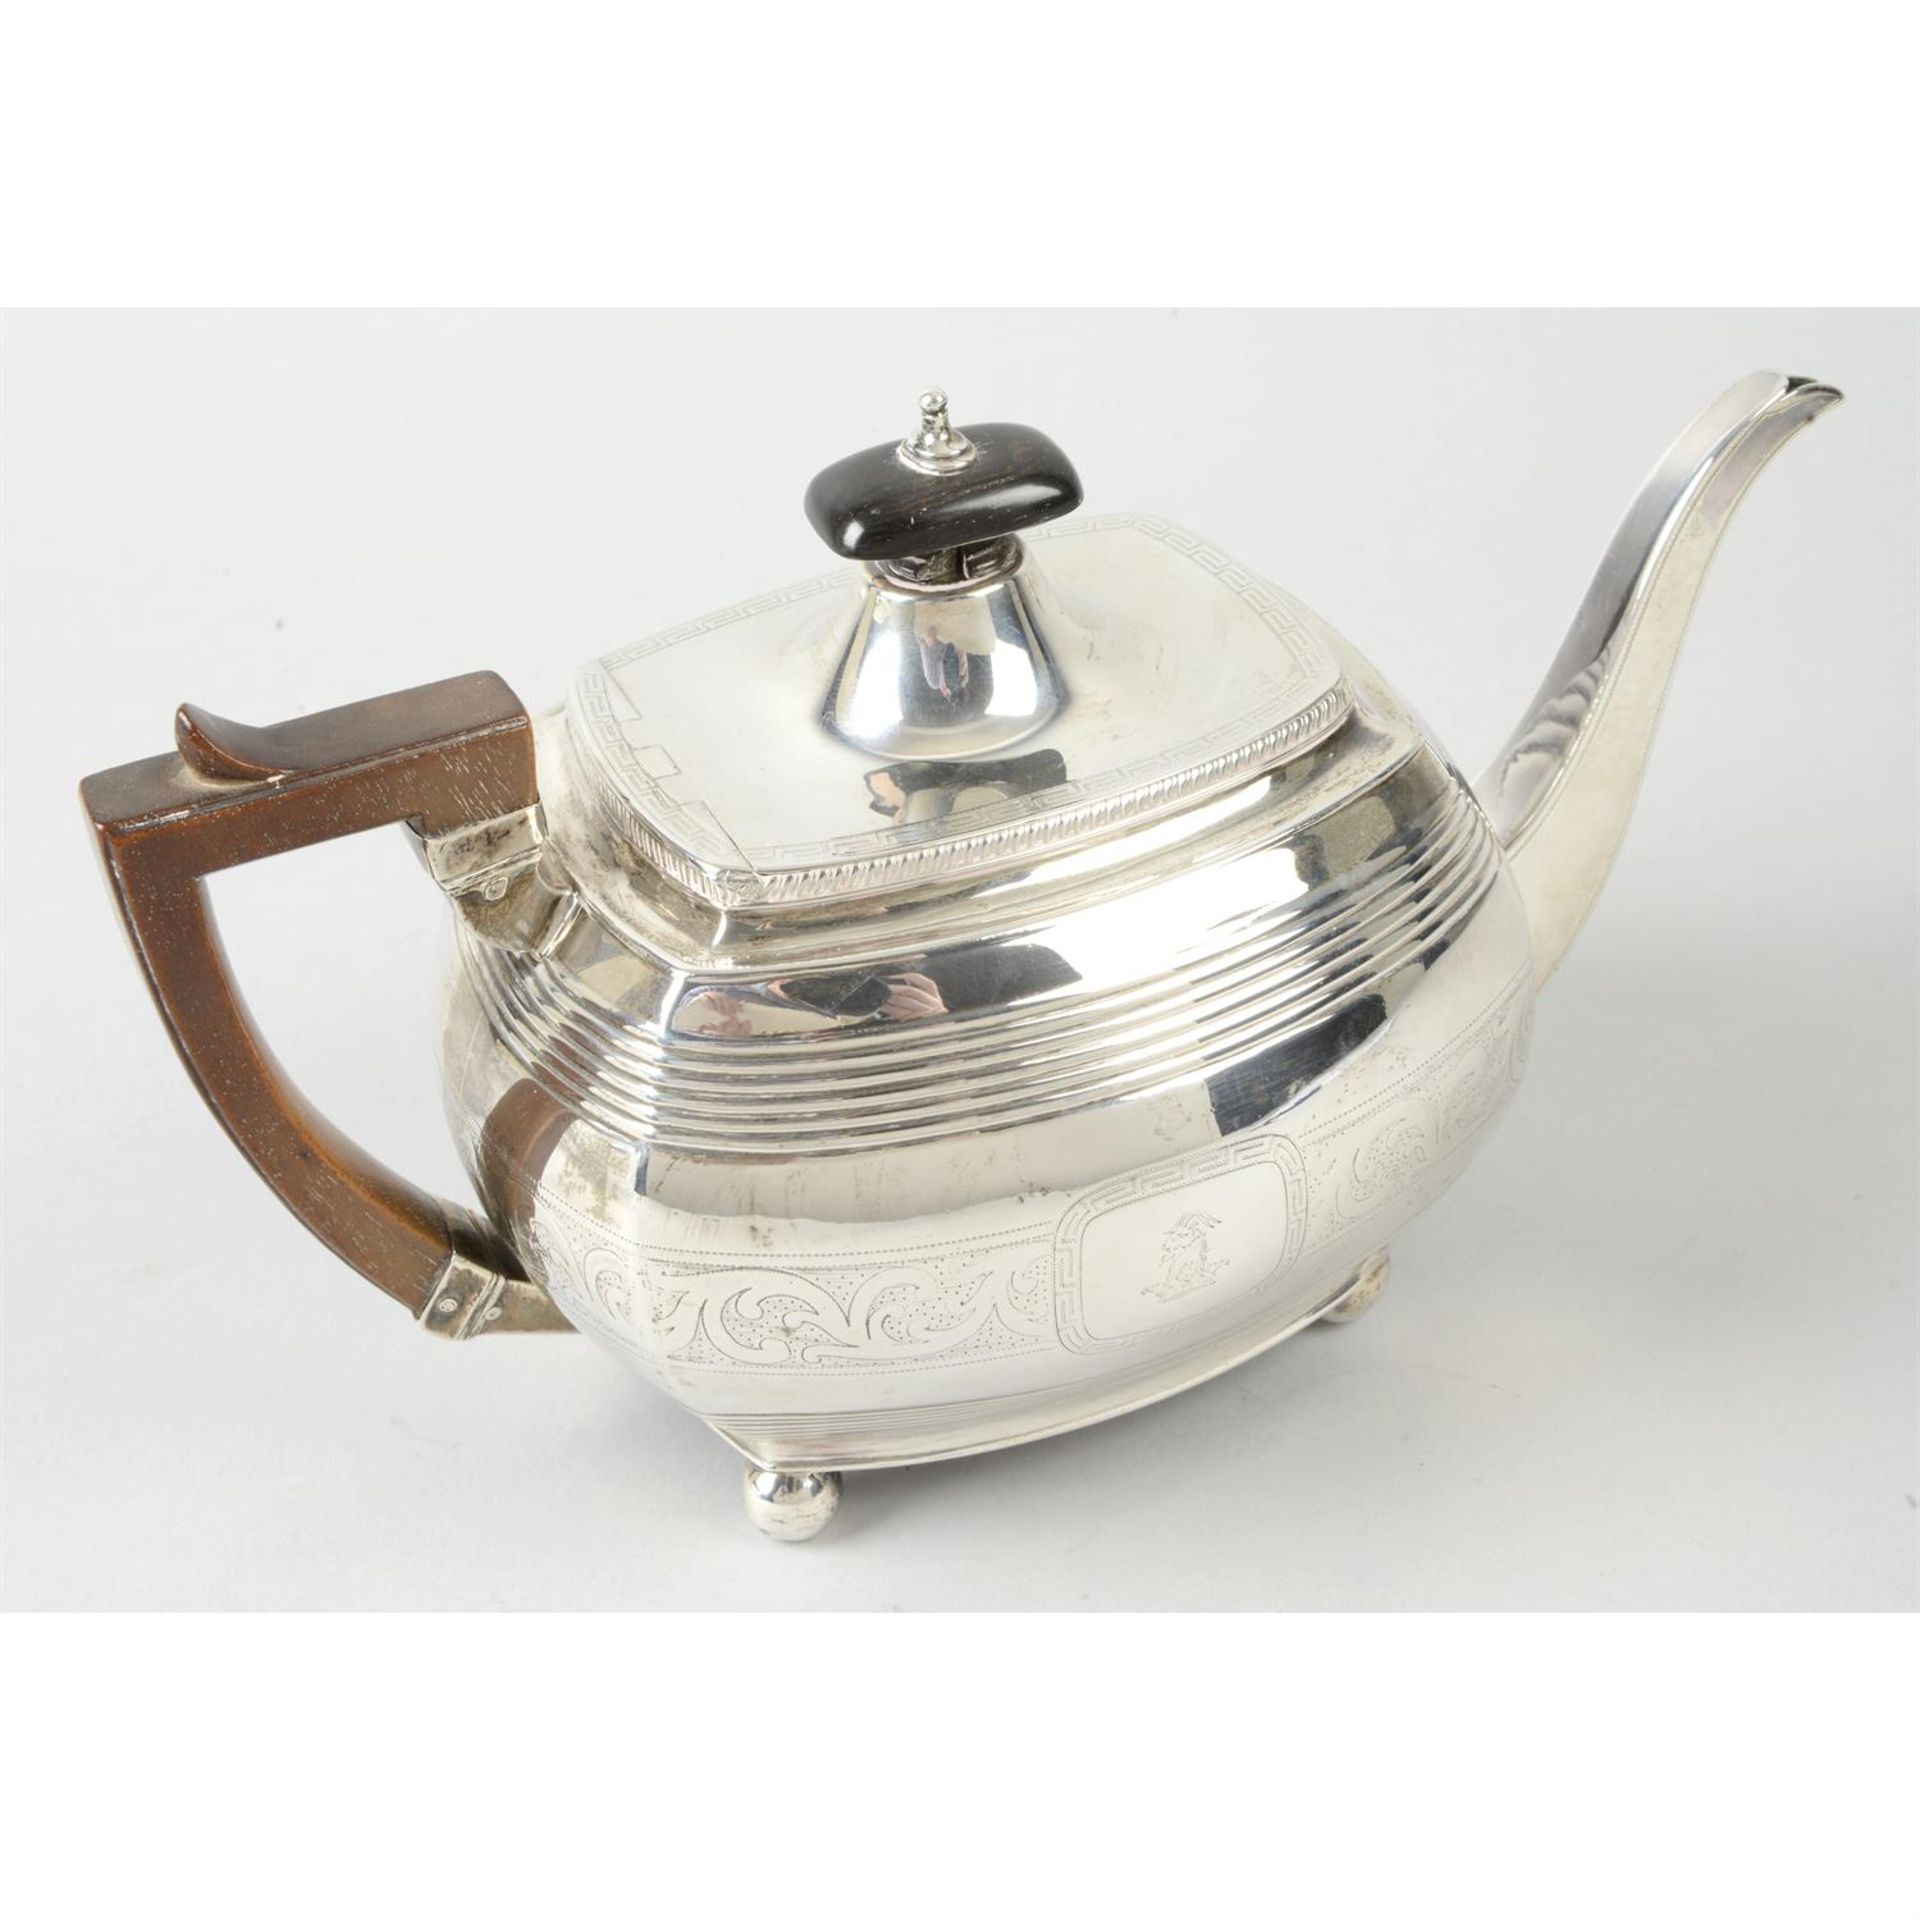 A George III silver teapot. - Image 2 of 3